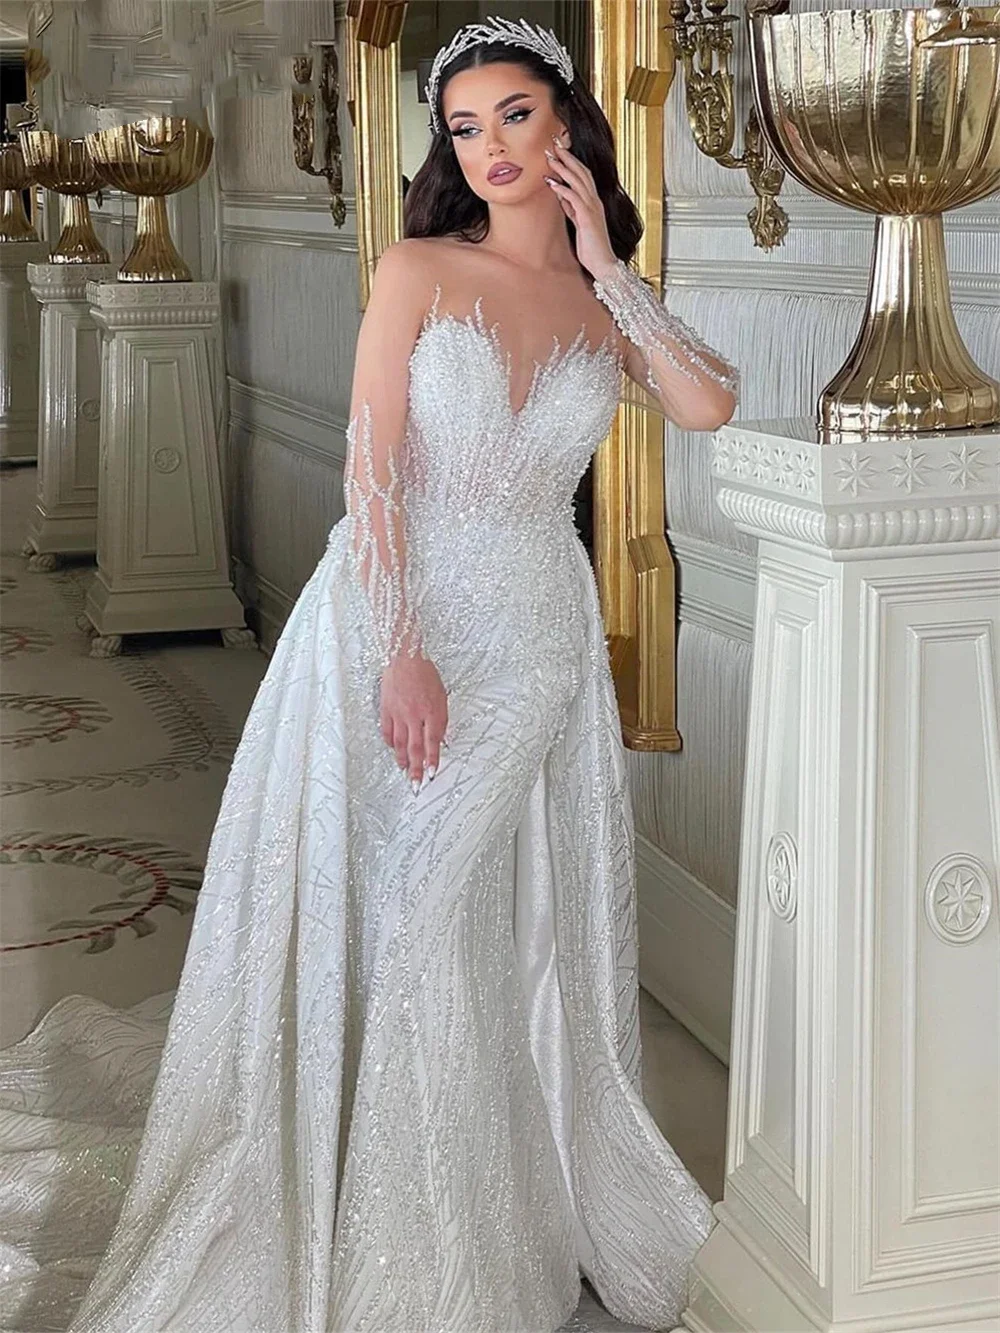 

Sheer Neck Beading Bride Dresses 2 in 1 Embroidery Wedding Dress With Illusion Long Sleeve Detachable Train Custom Bridal Gowns